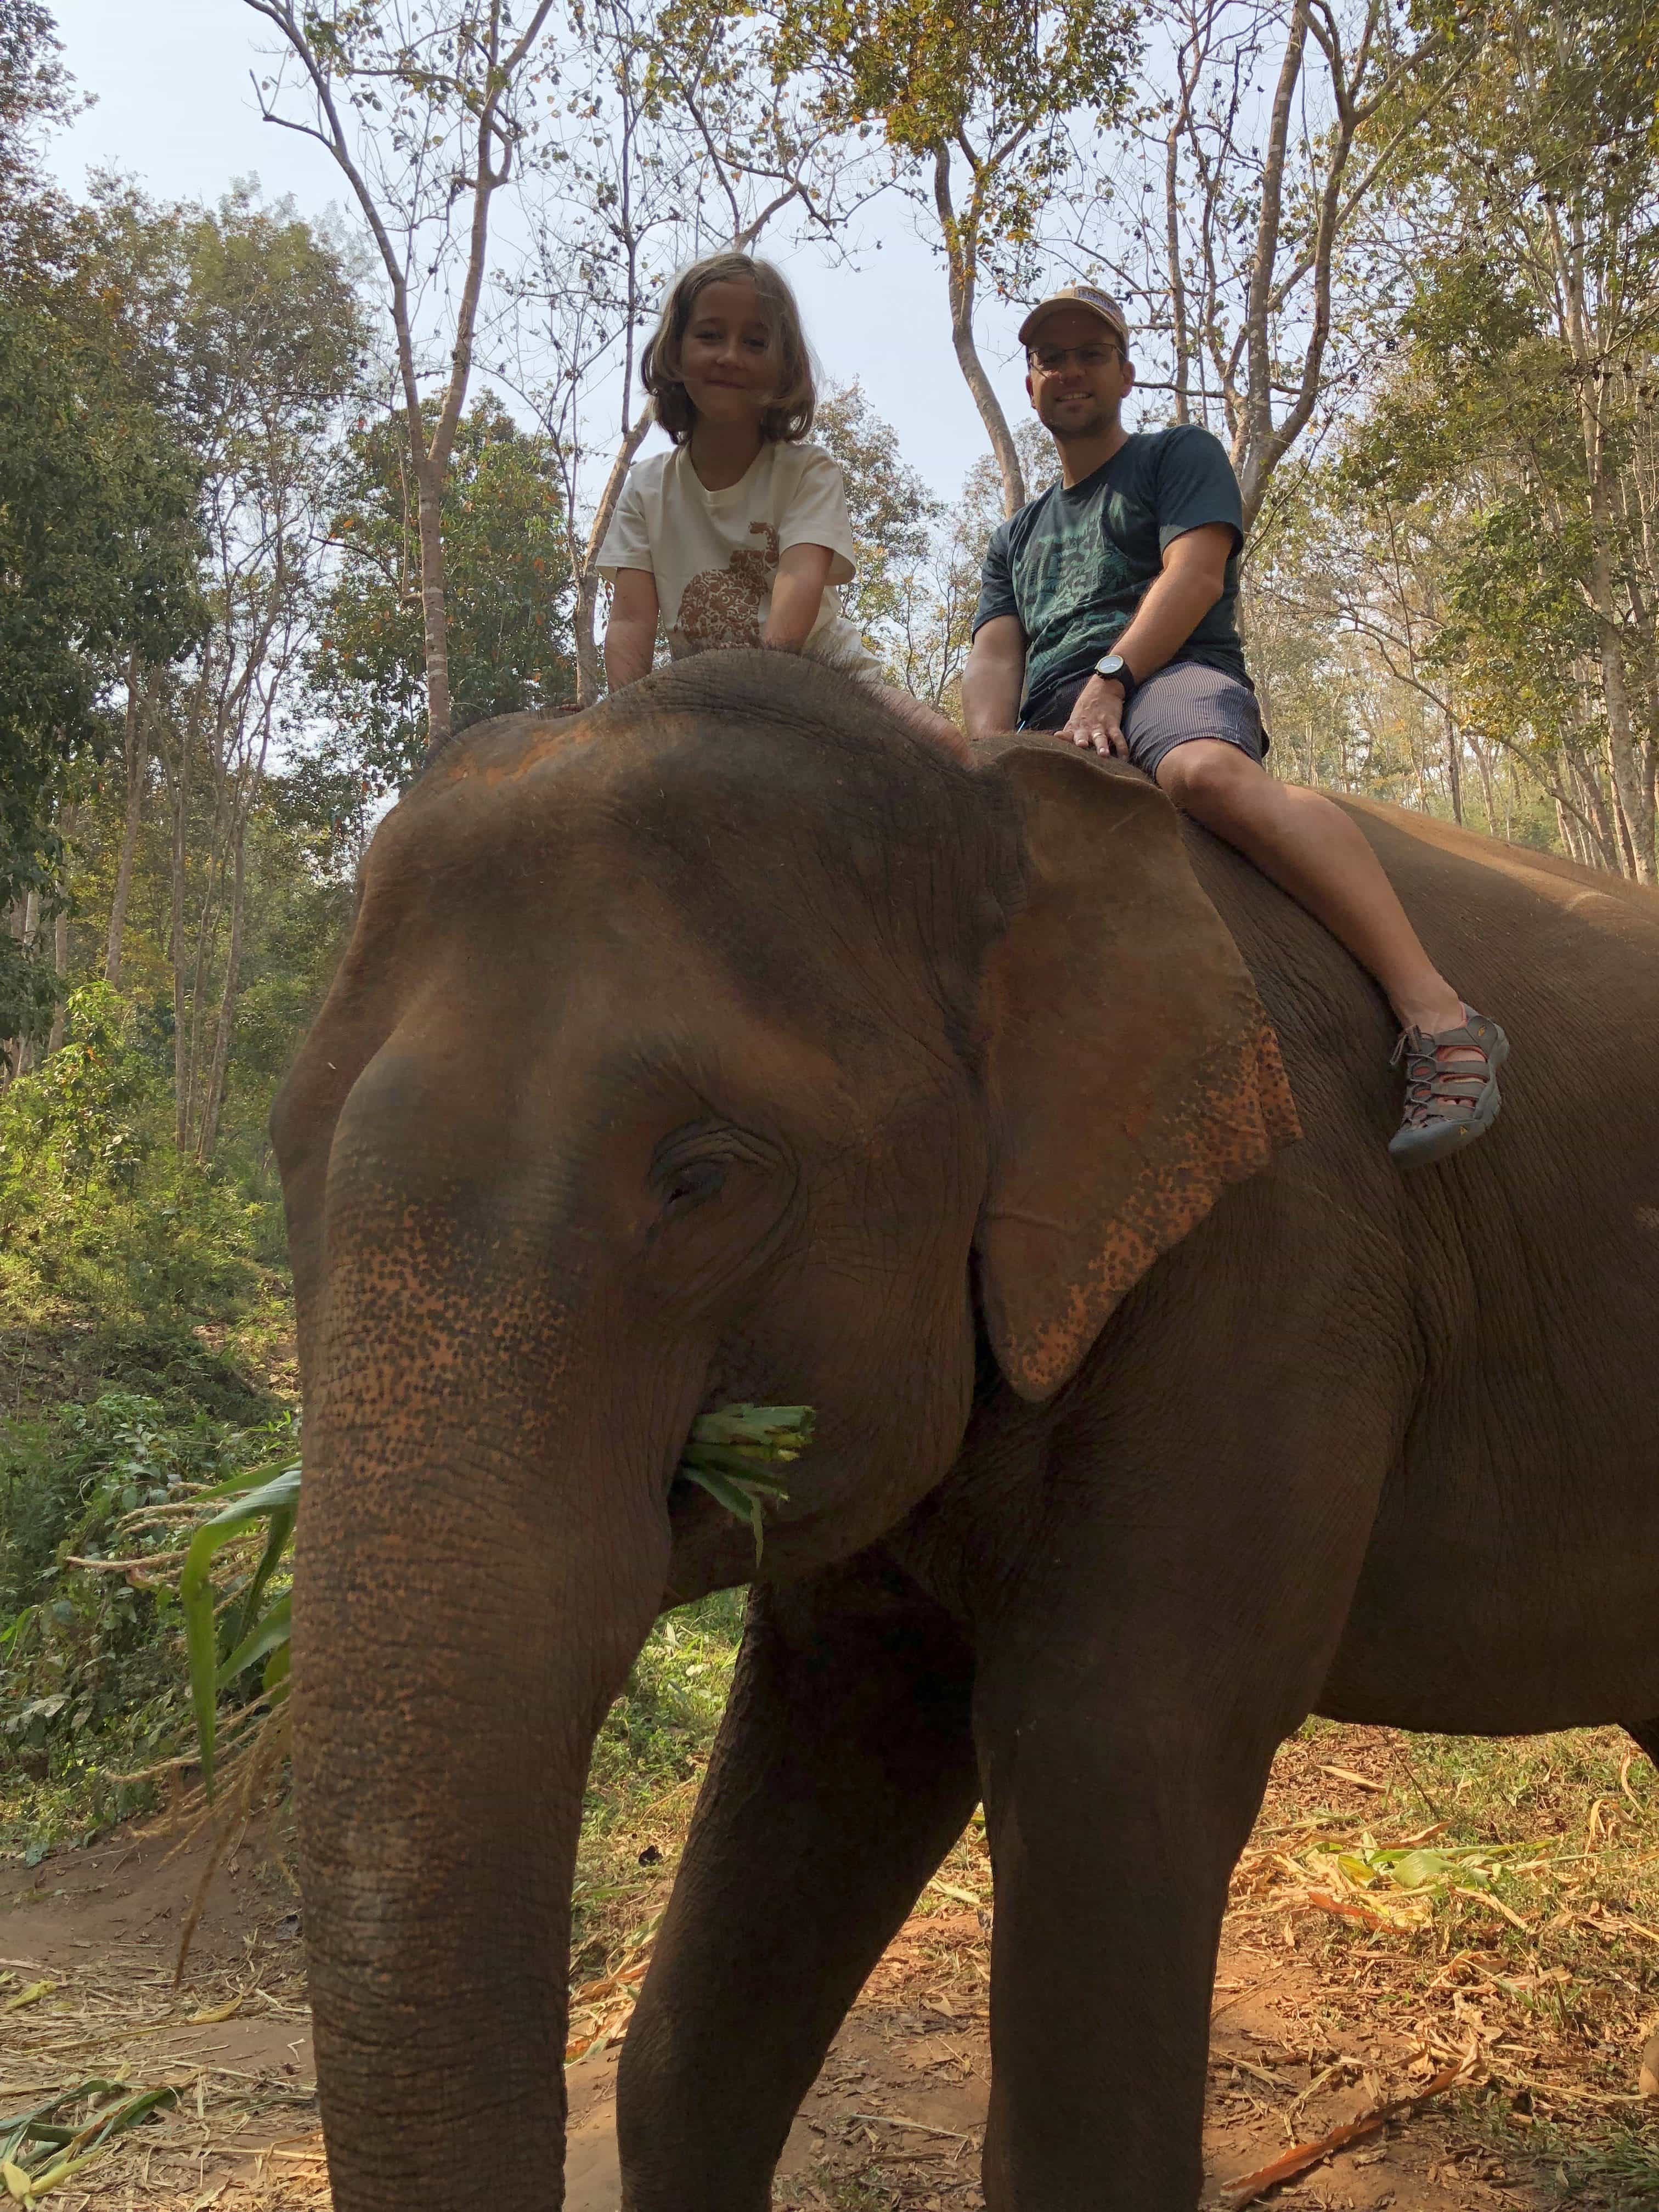 riding an elephant without a seat